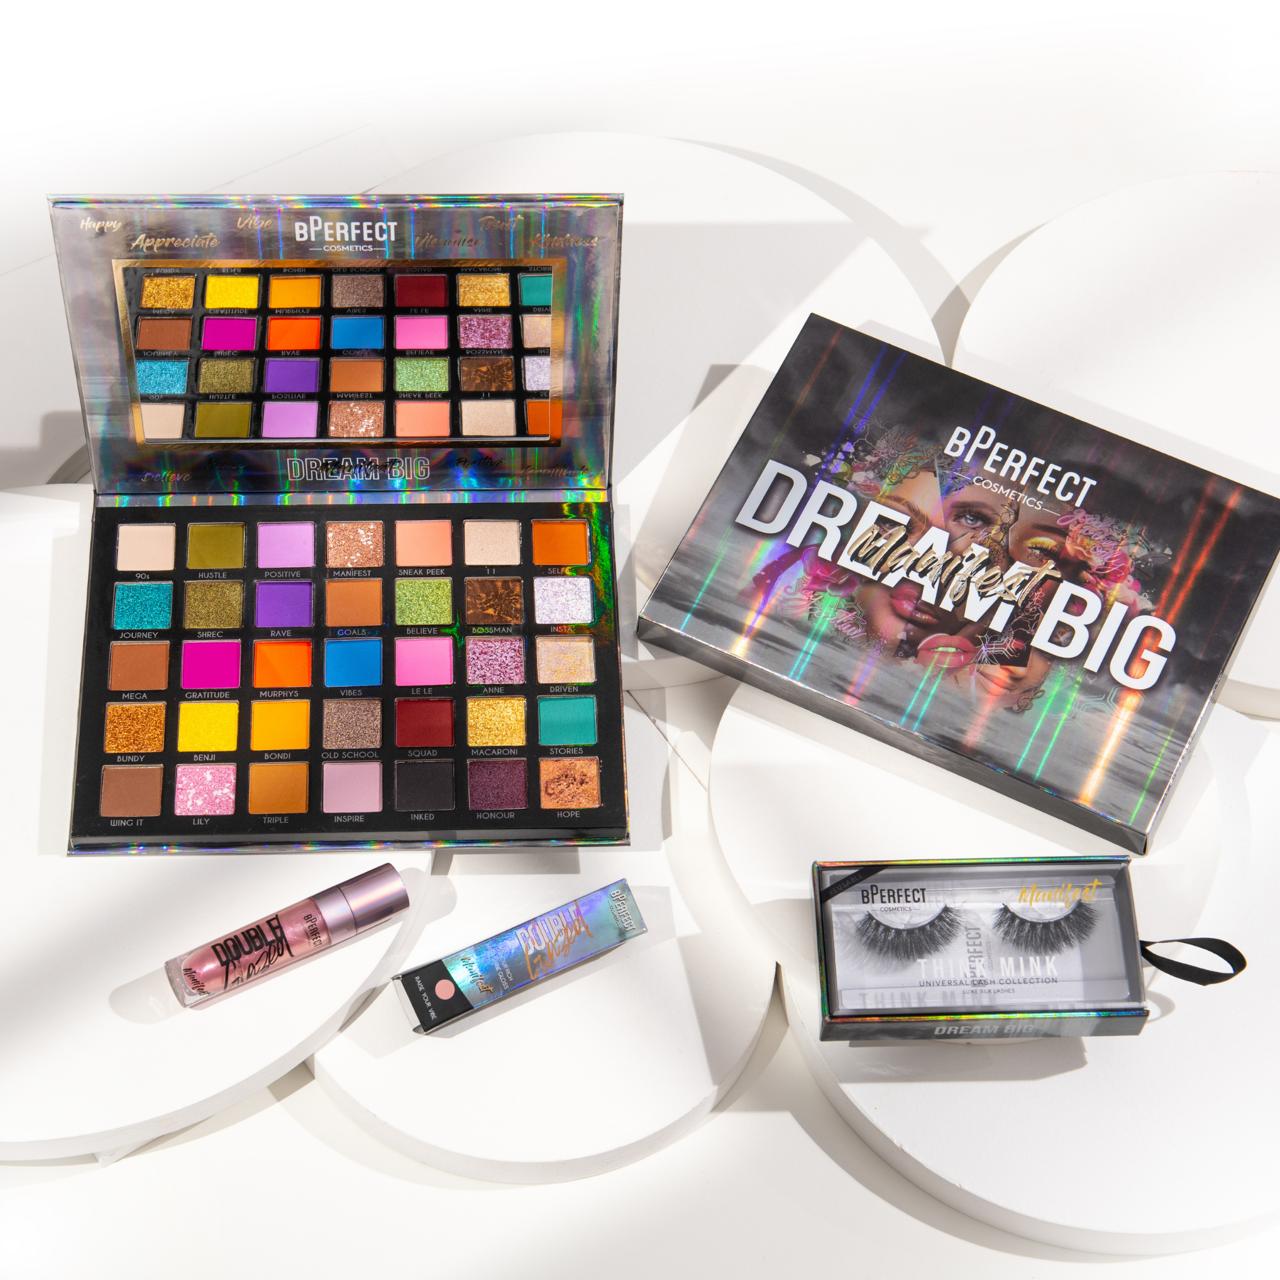 MANIFEST DREAM BIG collection (lashes not included)